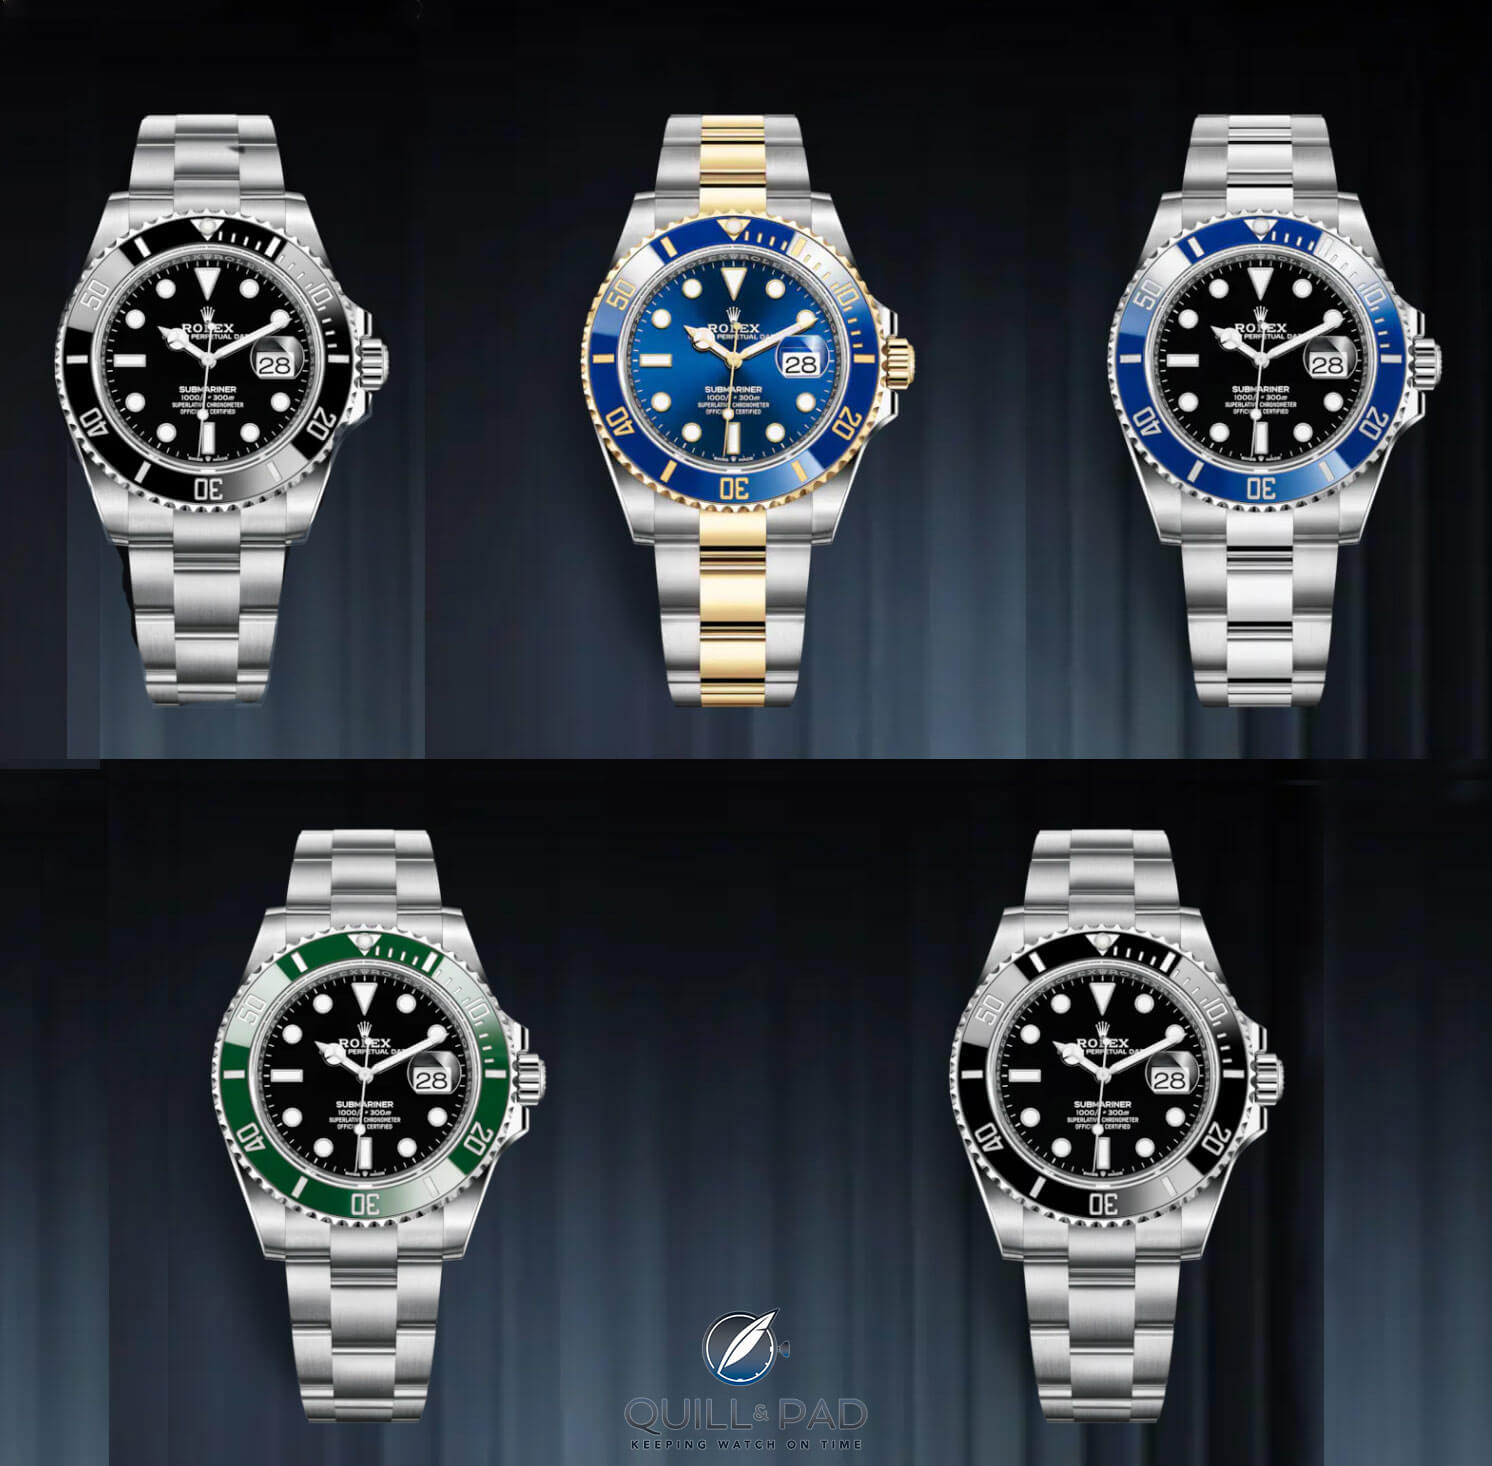 Introducing - 2020 Rolex Submariner Date 41mm Collection